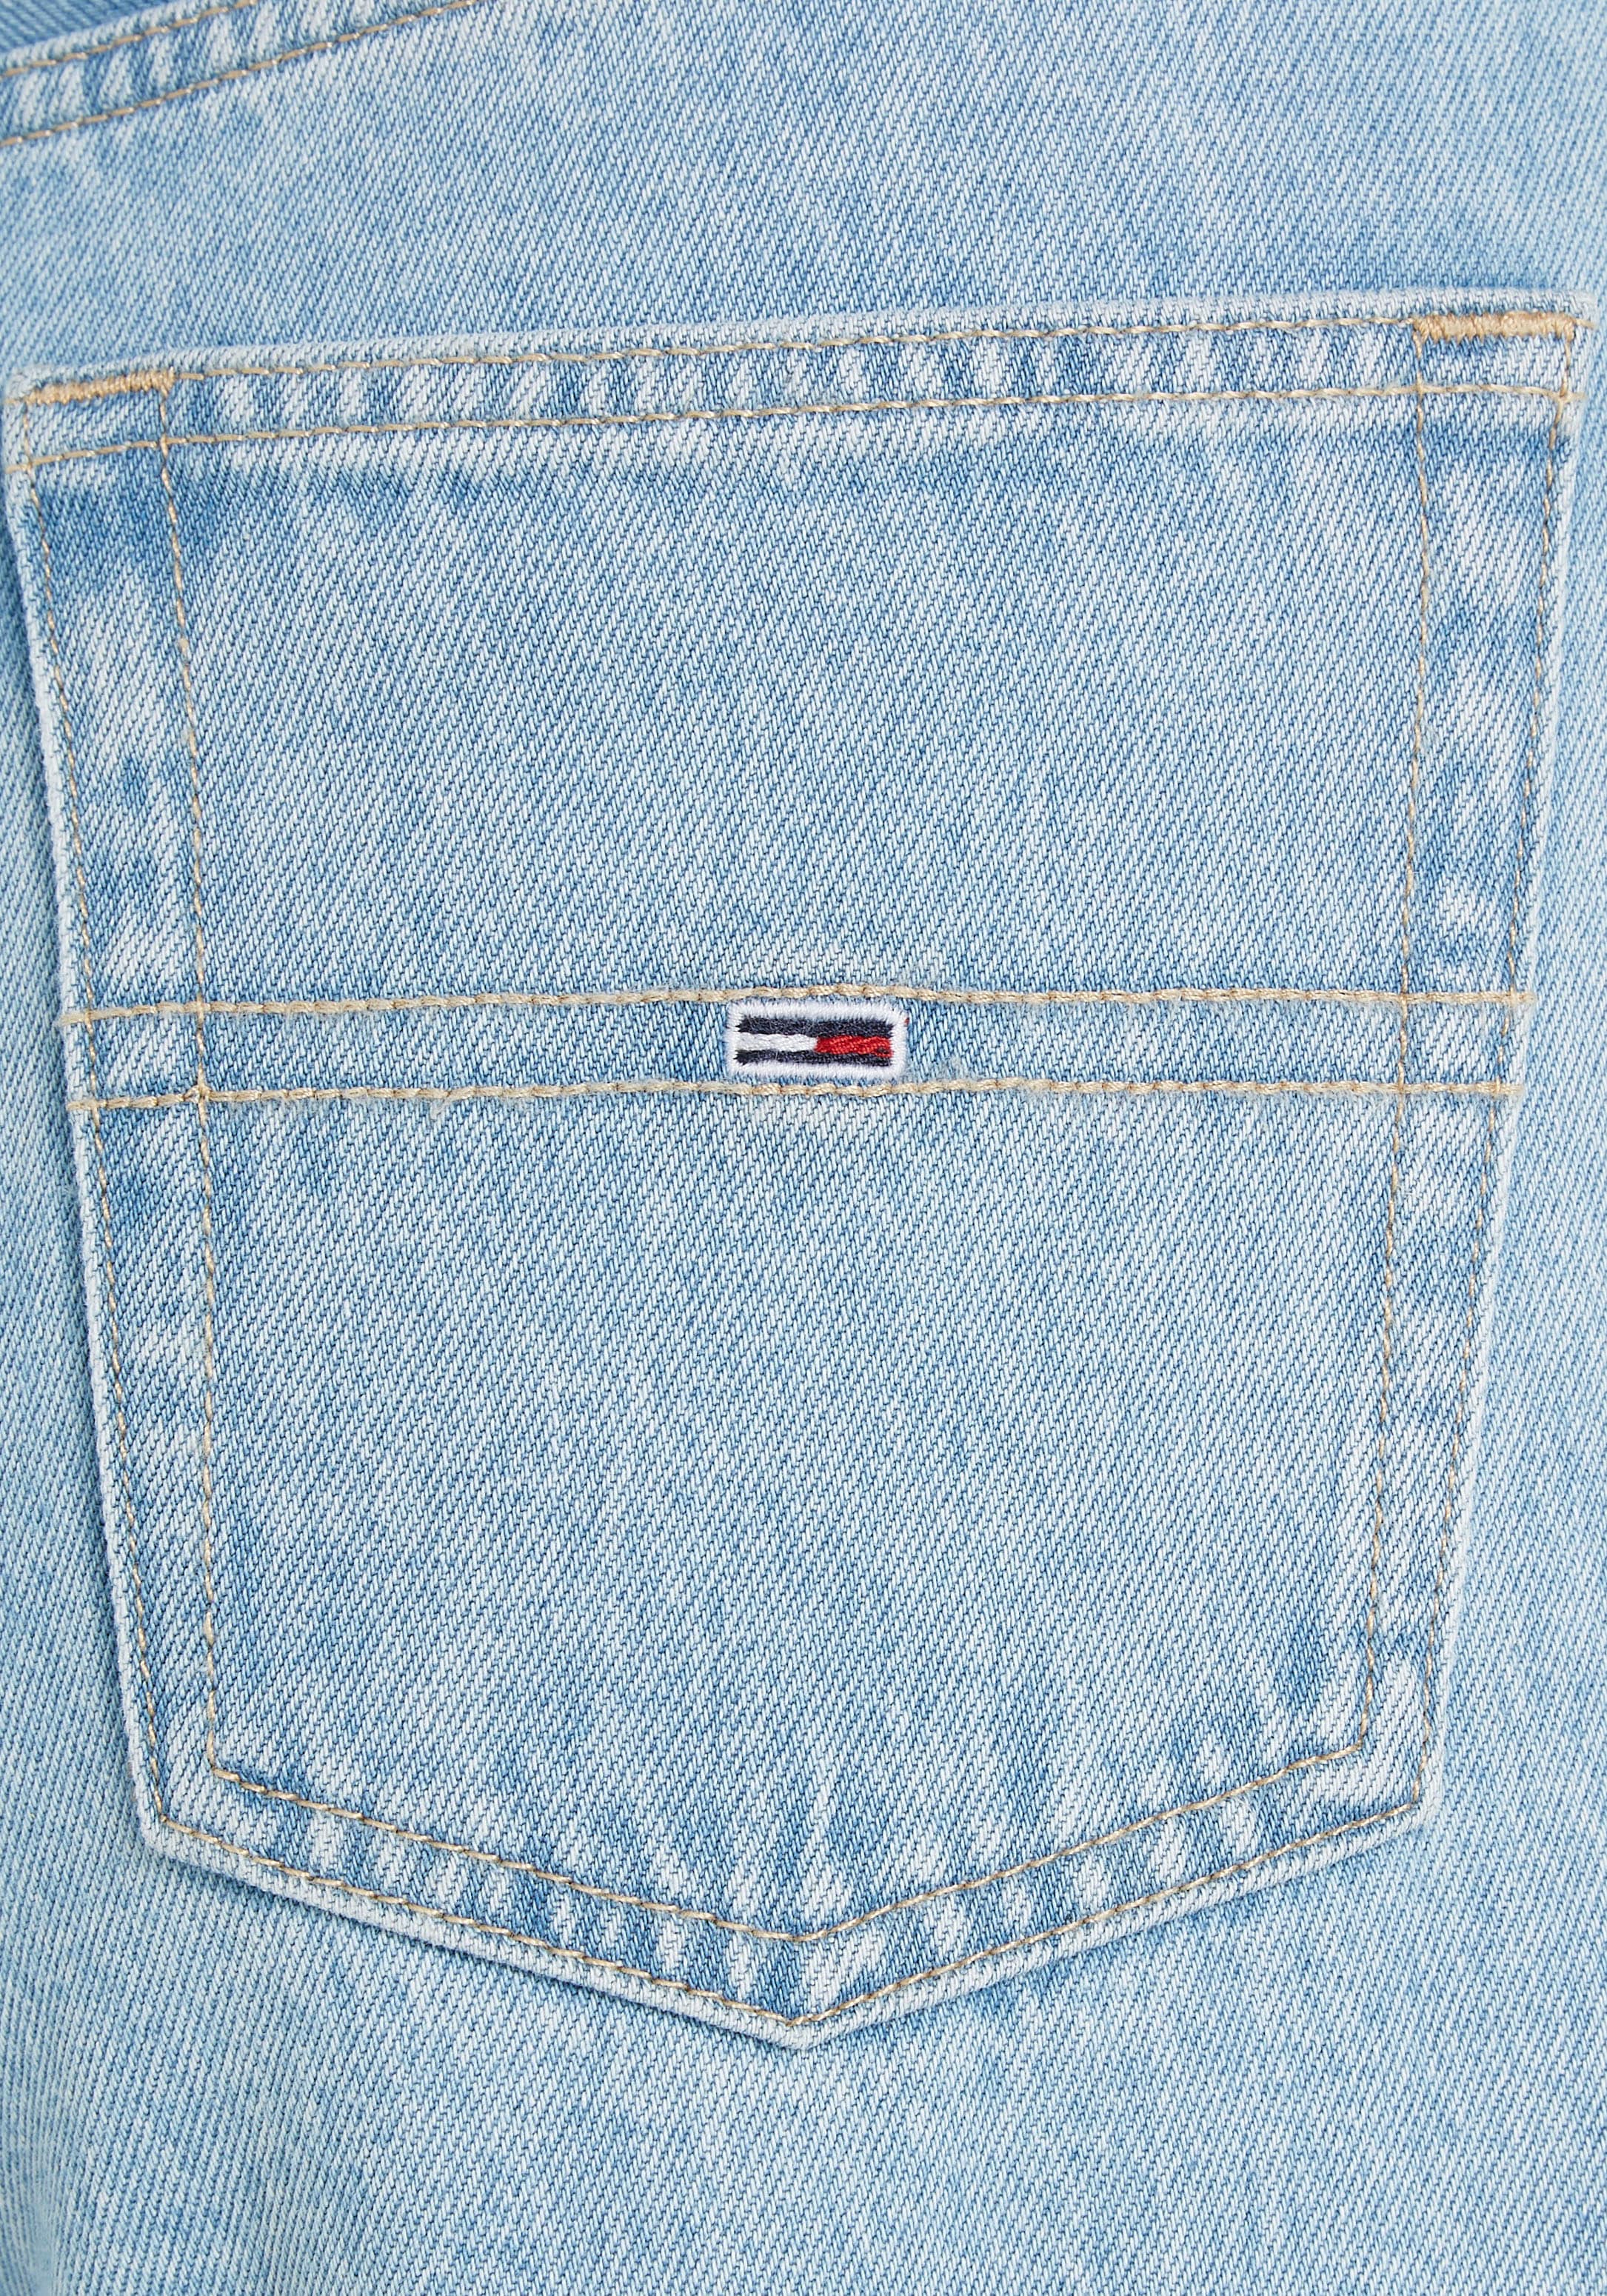 Tommy Jeans online Tommy UNIVERSAL Jeans, Jeans Logobadges Weite mit | kaufen